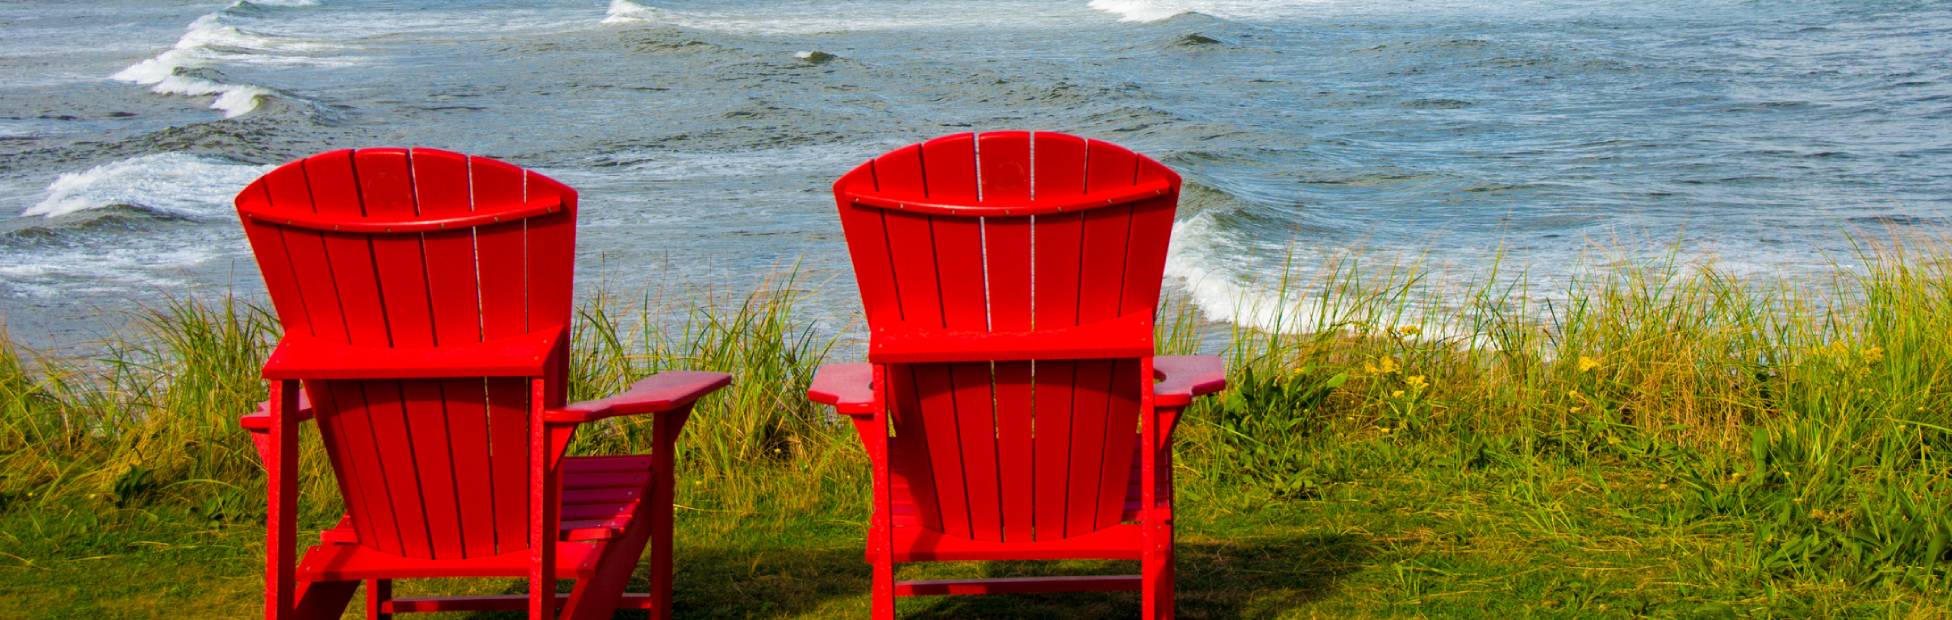 2 red Adirondack chairs overlooking the beach in PEI